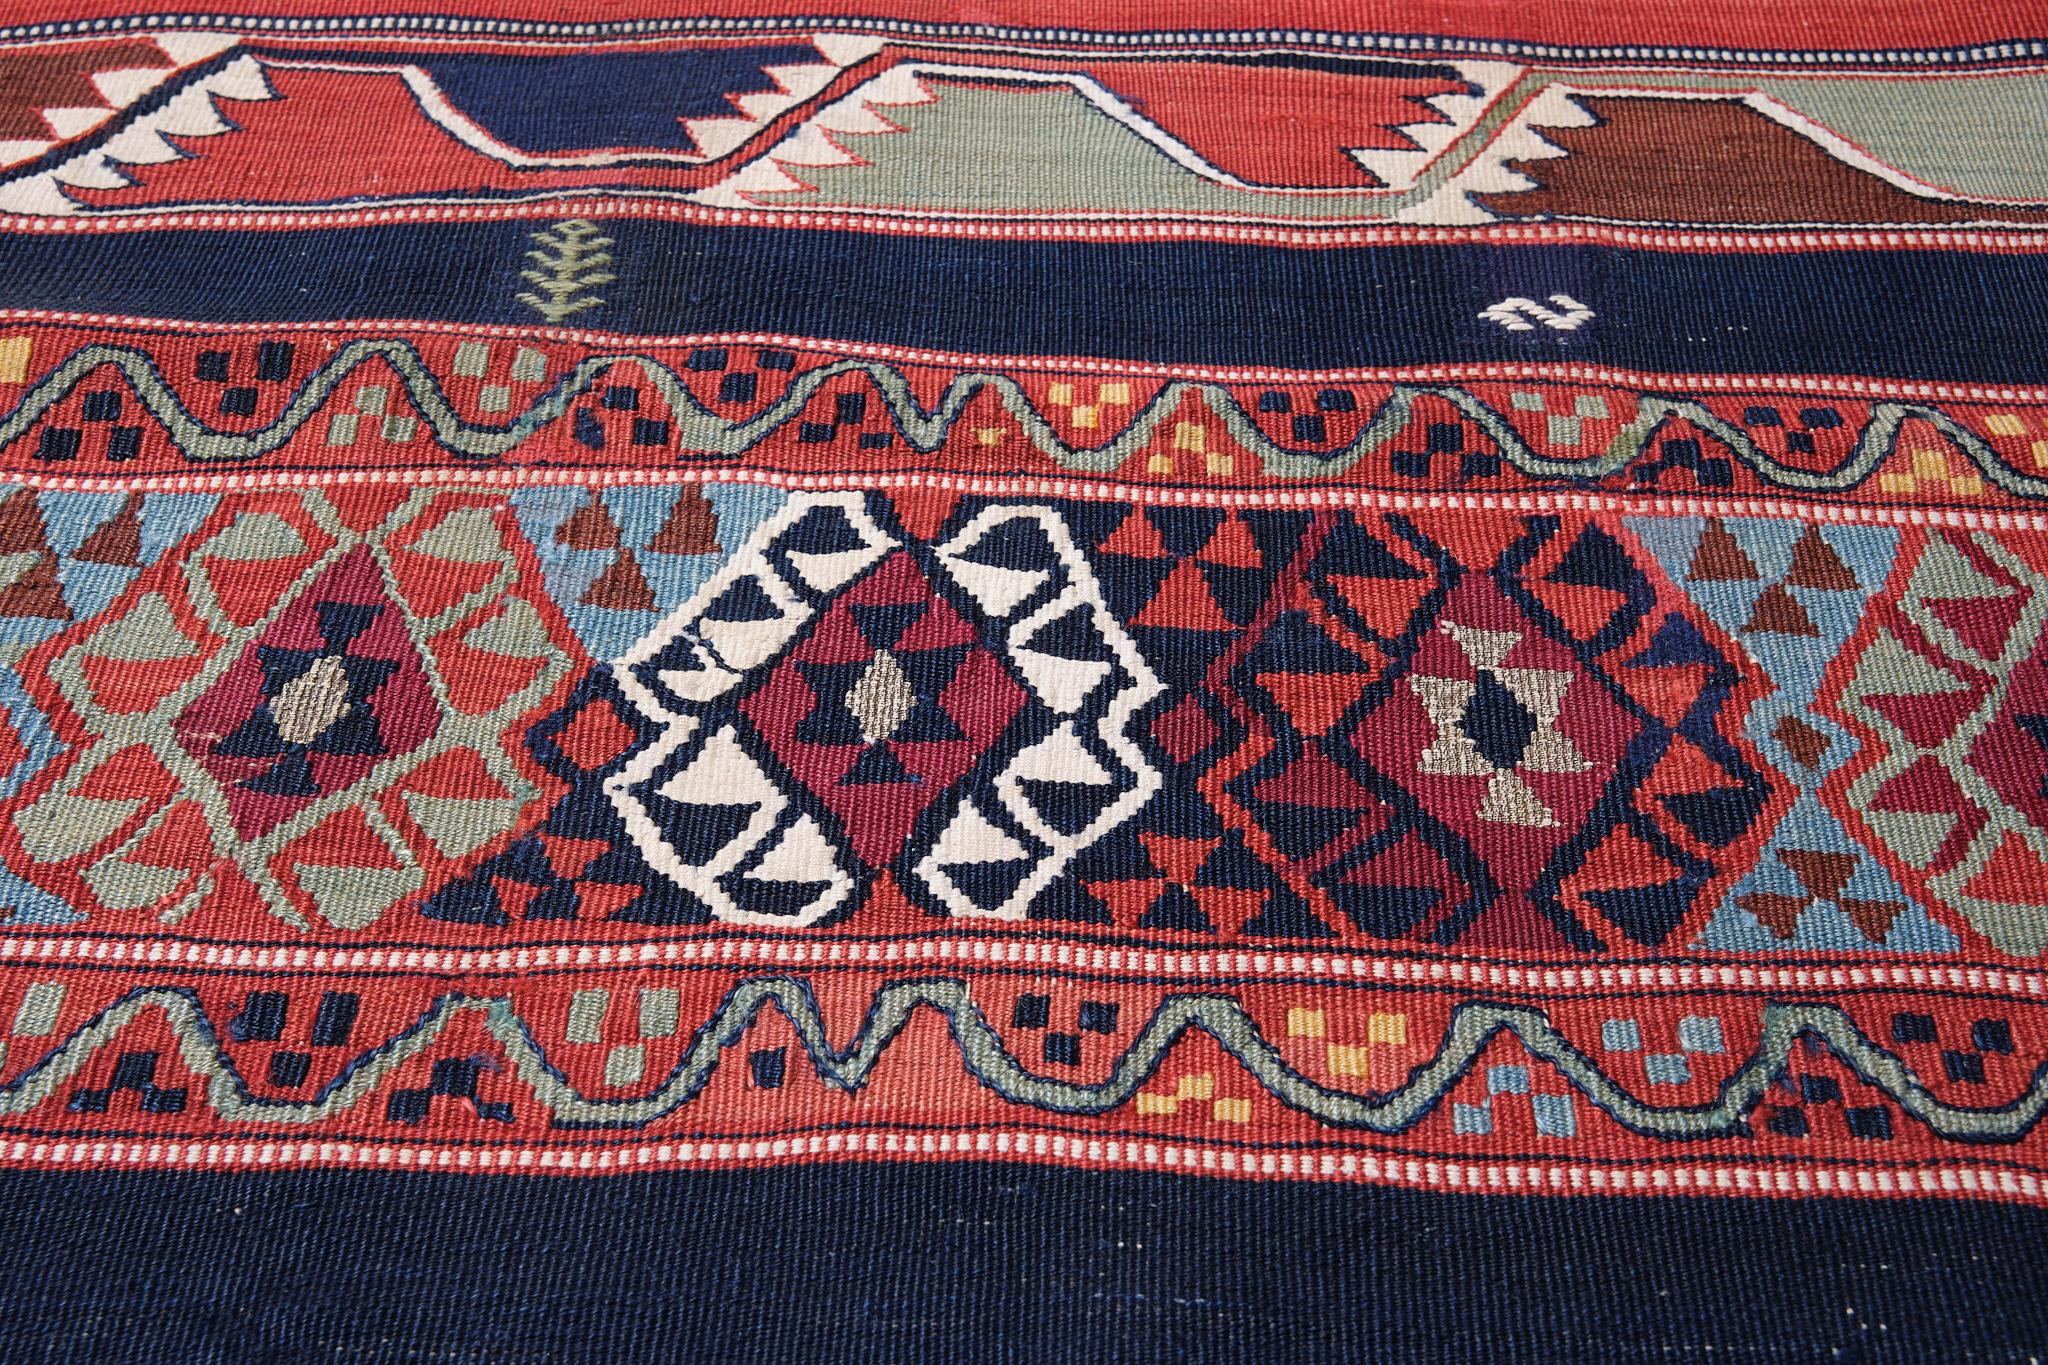 This is a South Eastern Anatolian Antique runner Kilim from the Malatya region with a rare and beautiful color composition.

Malatya is Turkey's main kilim production area, and there are many variations. This is one of them, a runner-type kilim.